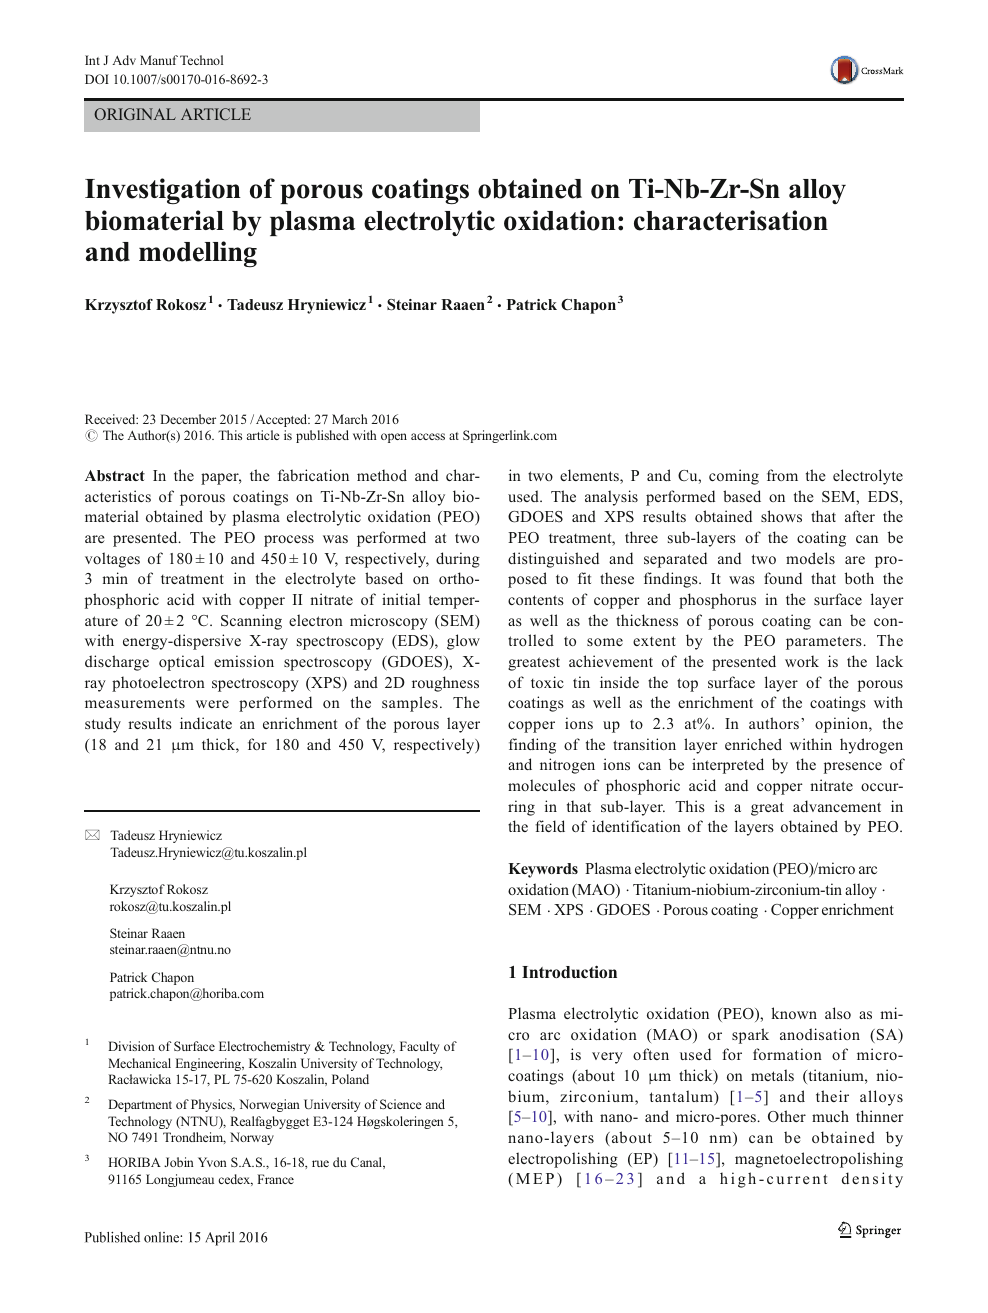 Investigation Of Porous Coatings Obtained On Ti Nb Zr Sn Alloy Biomaterial By Plasma Electrolytic Oxidation Characterisation And Modelling Topic Of Research Paper In Chemical Sciences Download Scholarly Article Pdf And Read For Free